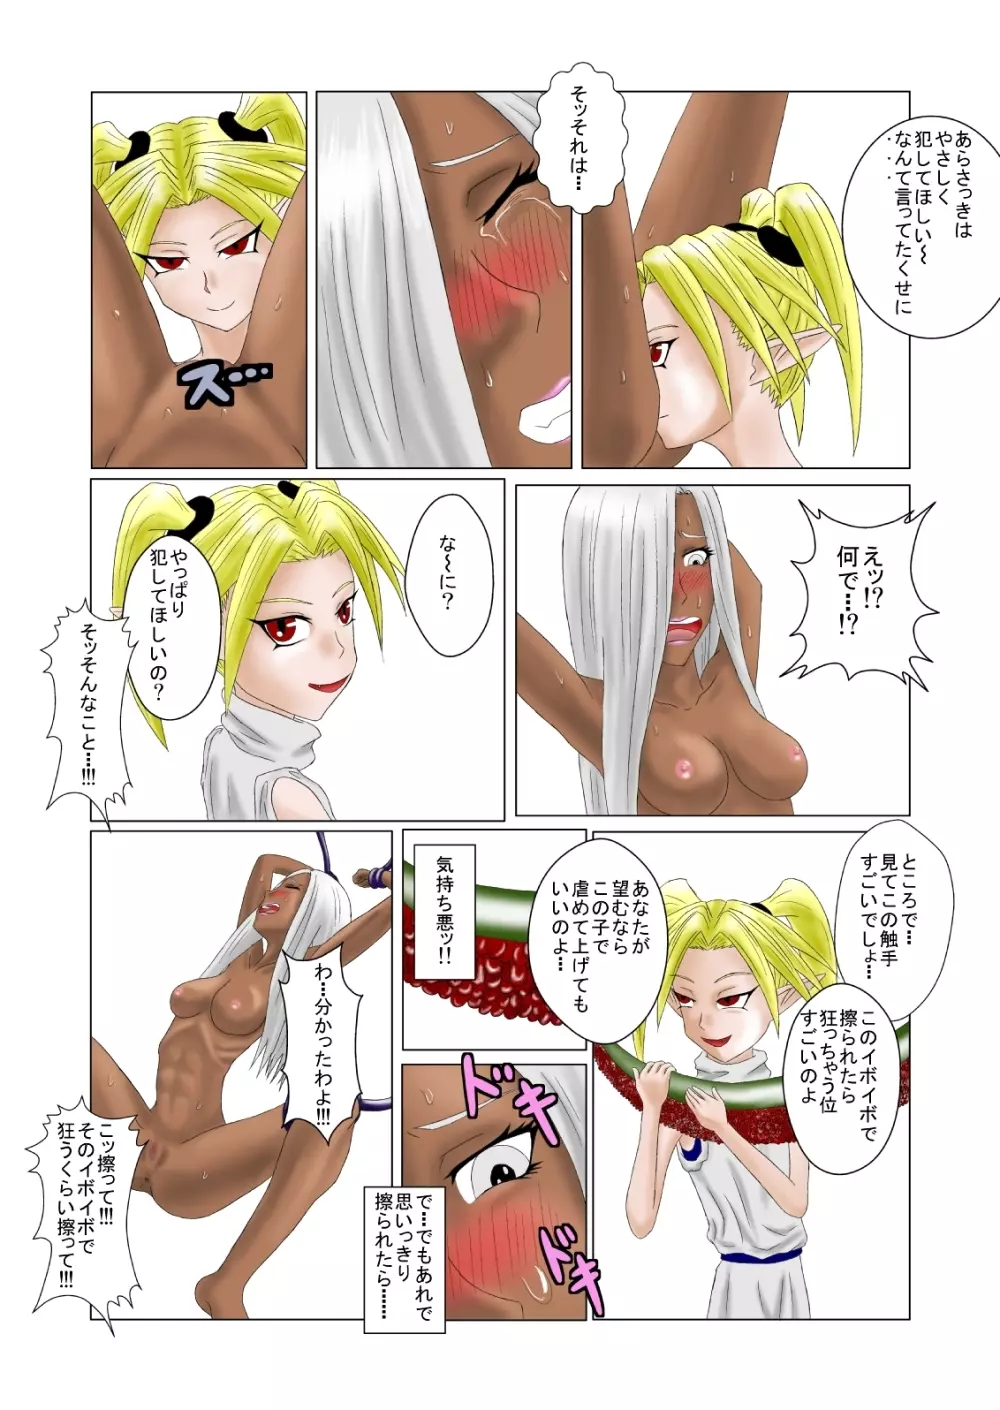 The Tales of Tickling Vol. 1 16ページ